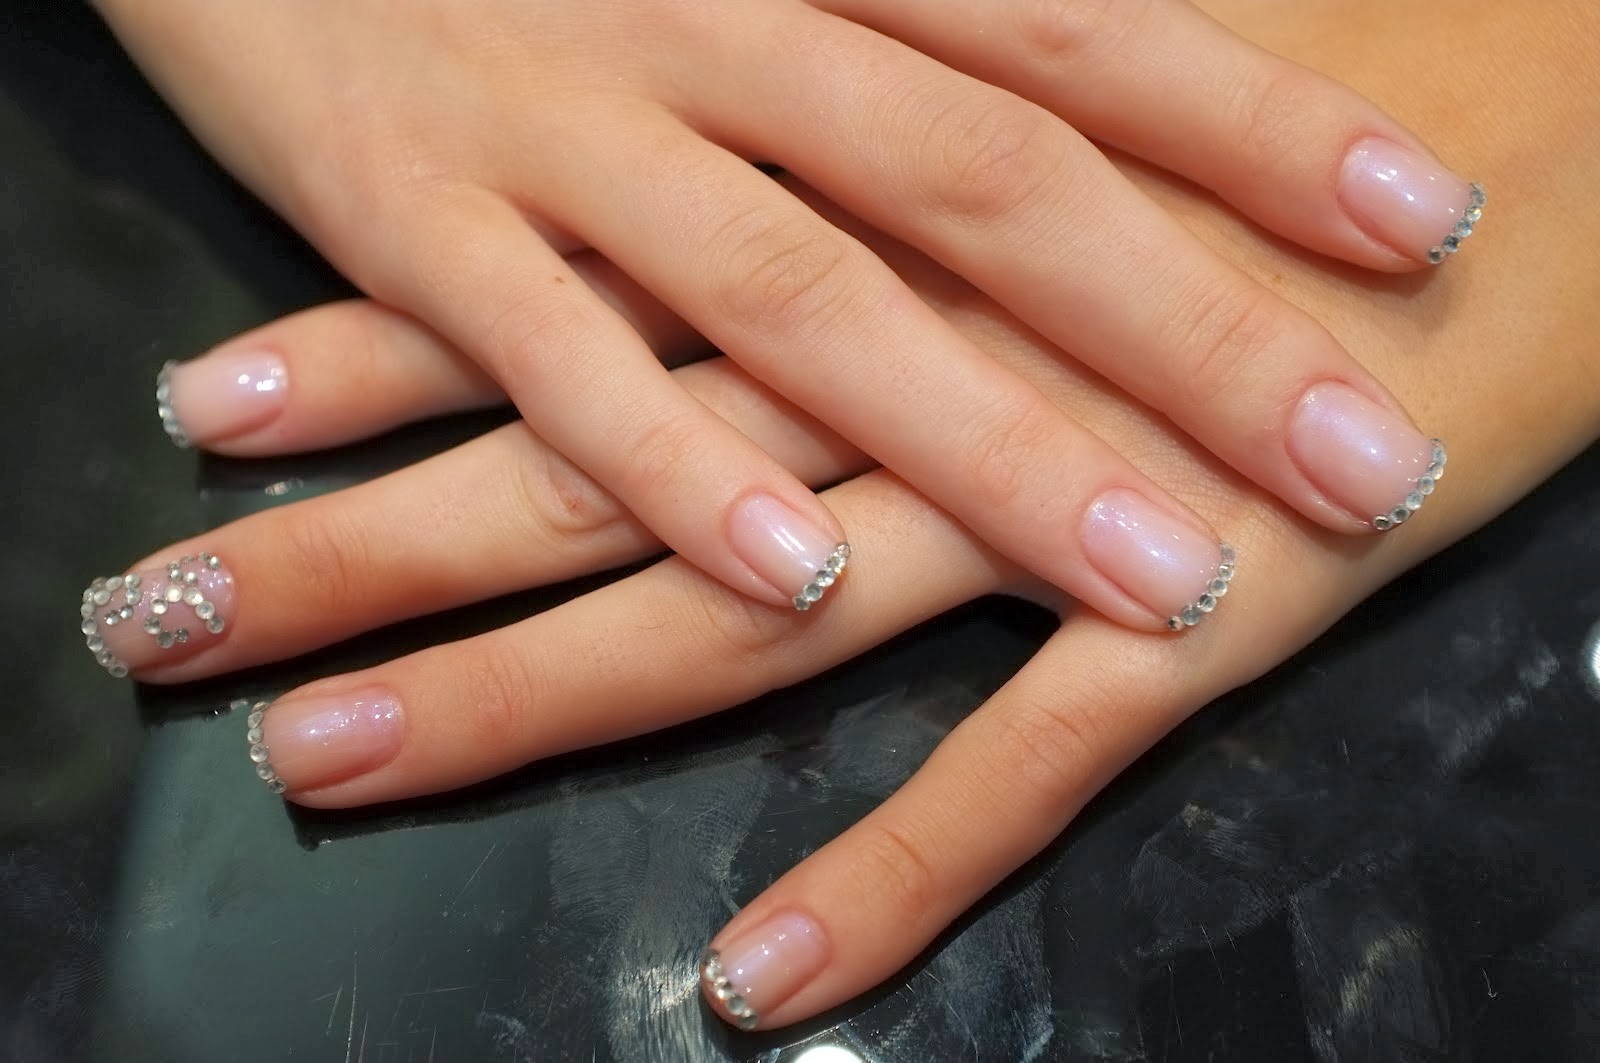 2. 10 Stunning Diamond Nail Designs for Your Next Manicure - wide 3